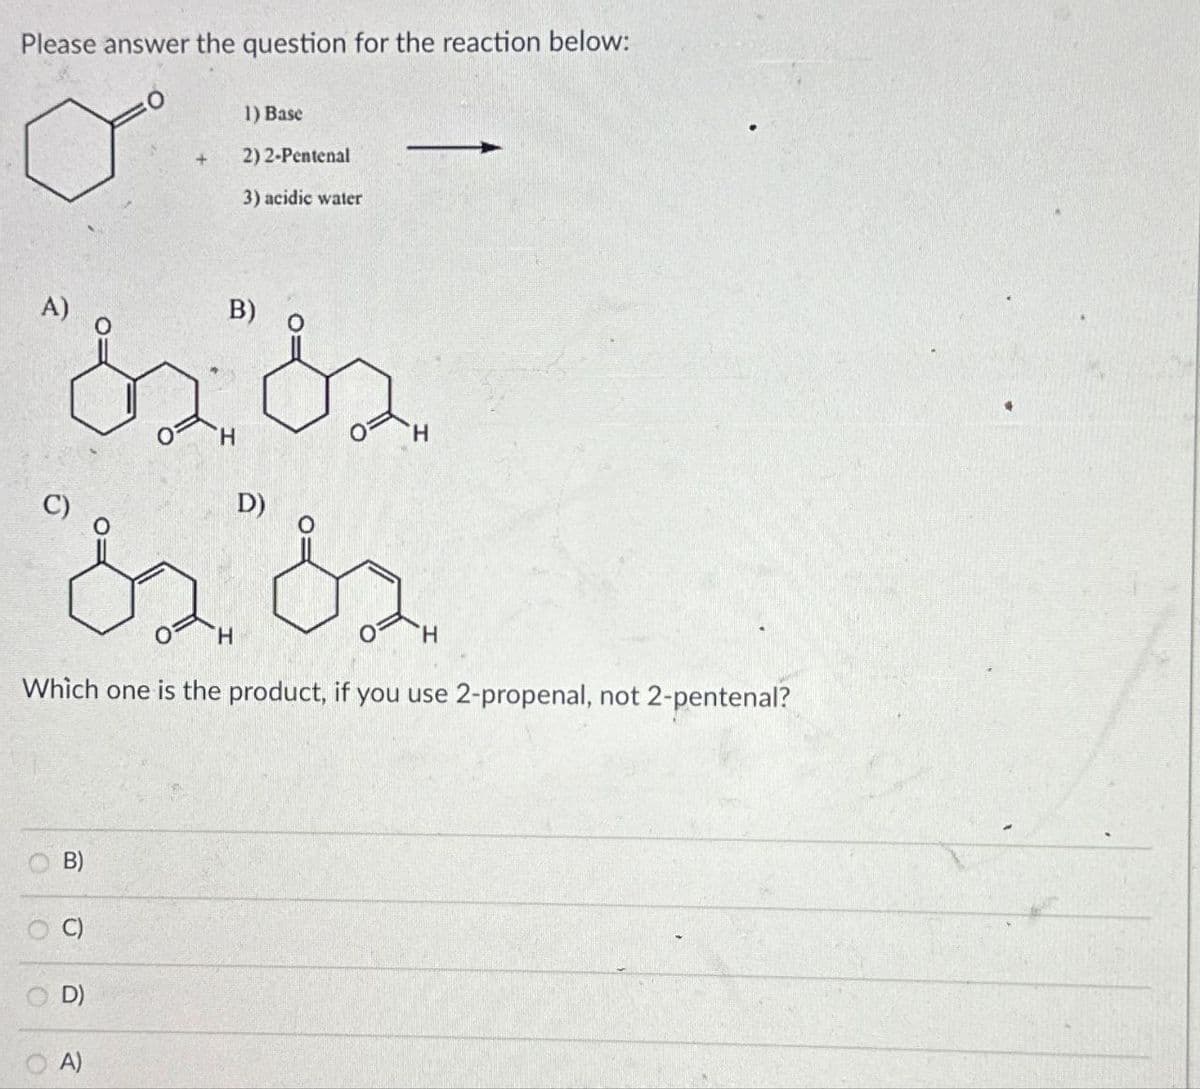 Please answer the question for the reaction below:
+
A)
B)
D)
1) Base
2) 2-Pentenal
3) acidic water
H
H
H
Which one is the product, if you use 2-propenal, not 2-pentenal?
O
Olo
O
B)
C)
D)
A)